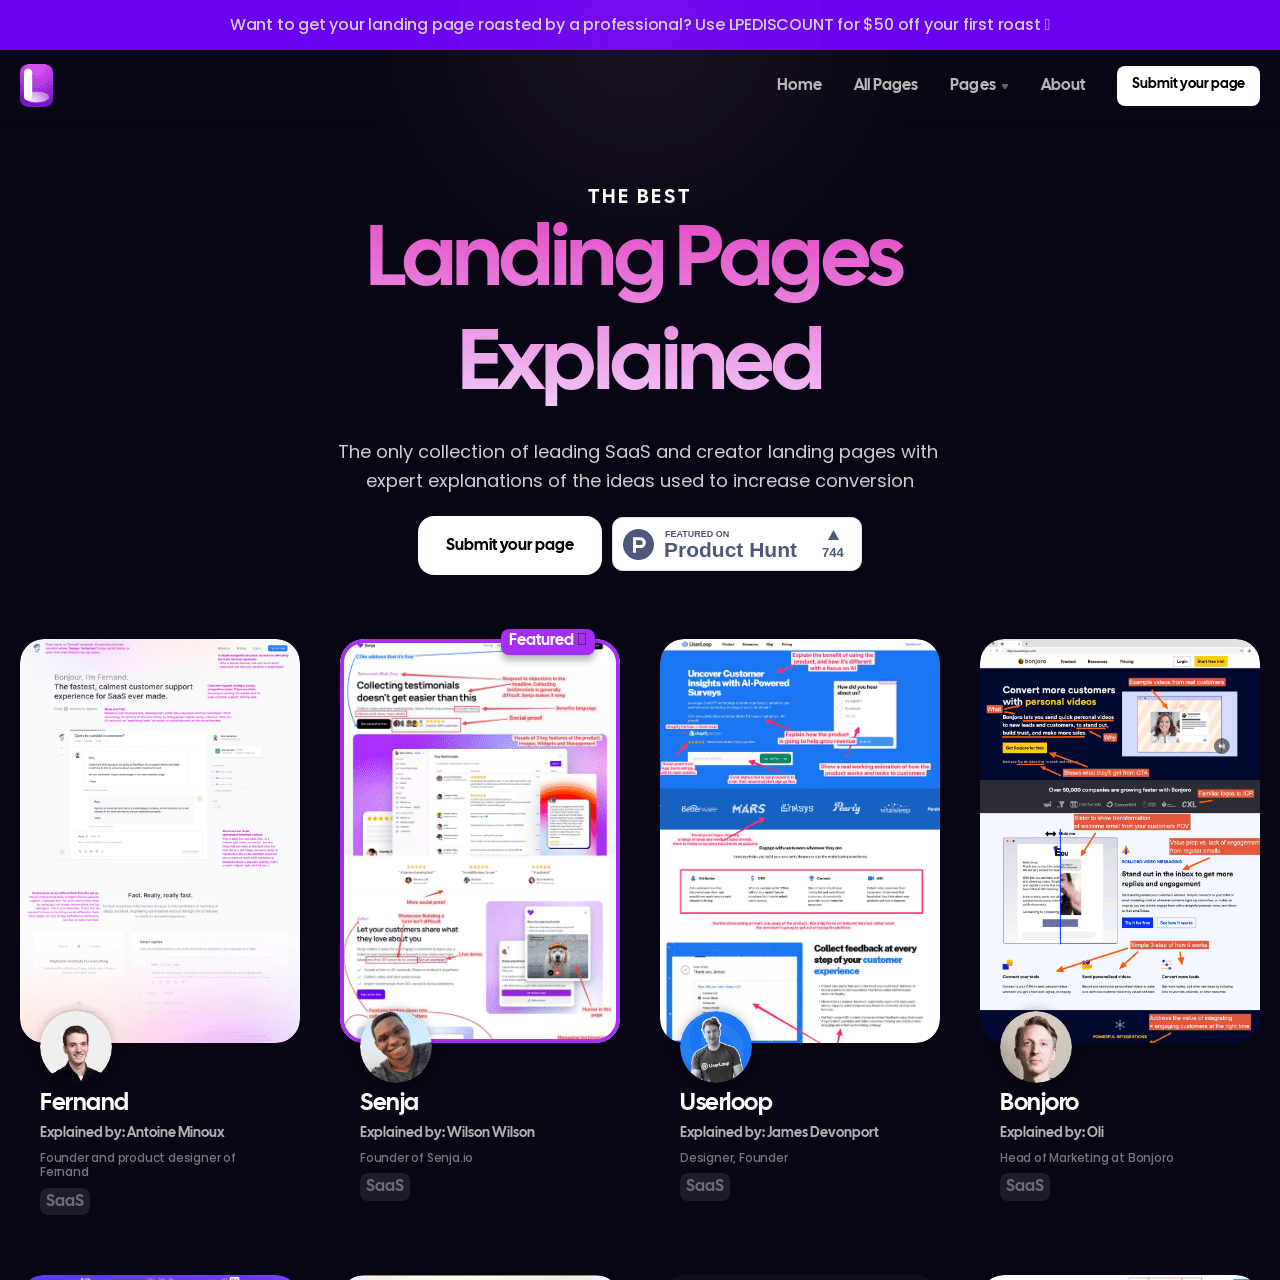 Screenshot of Landing Pages Explained website